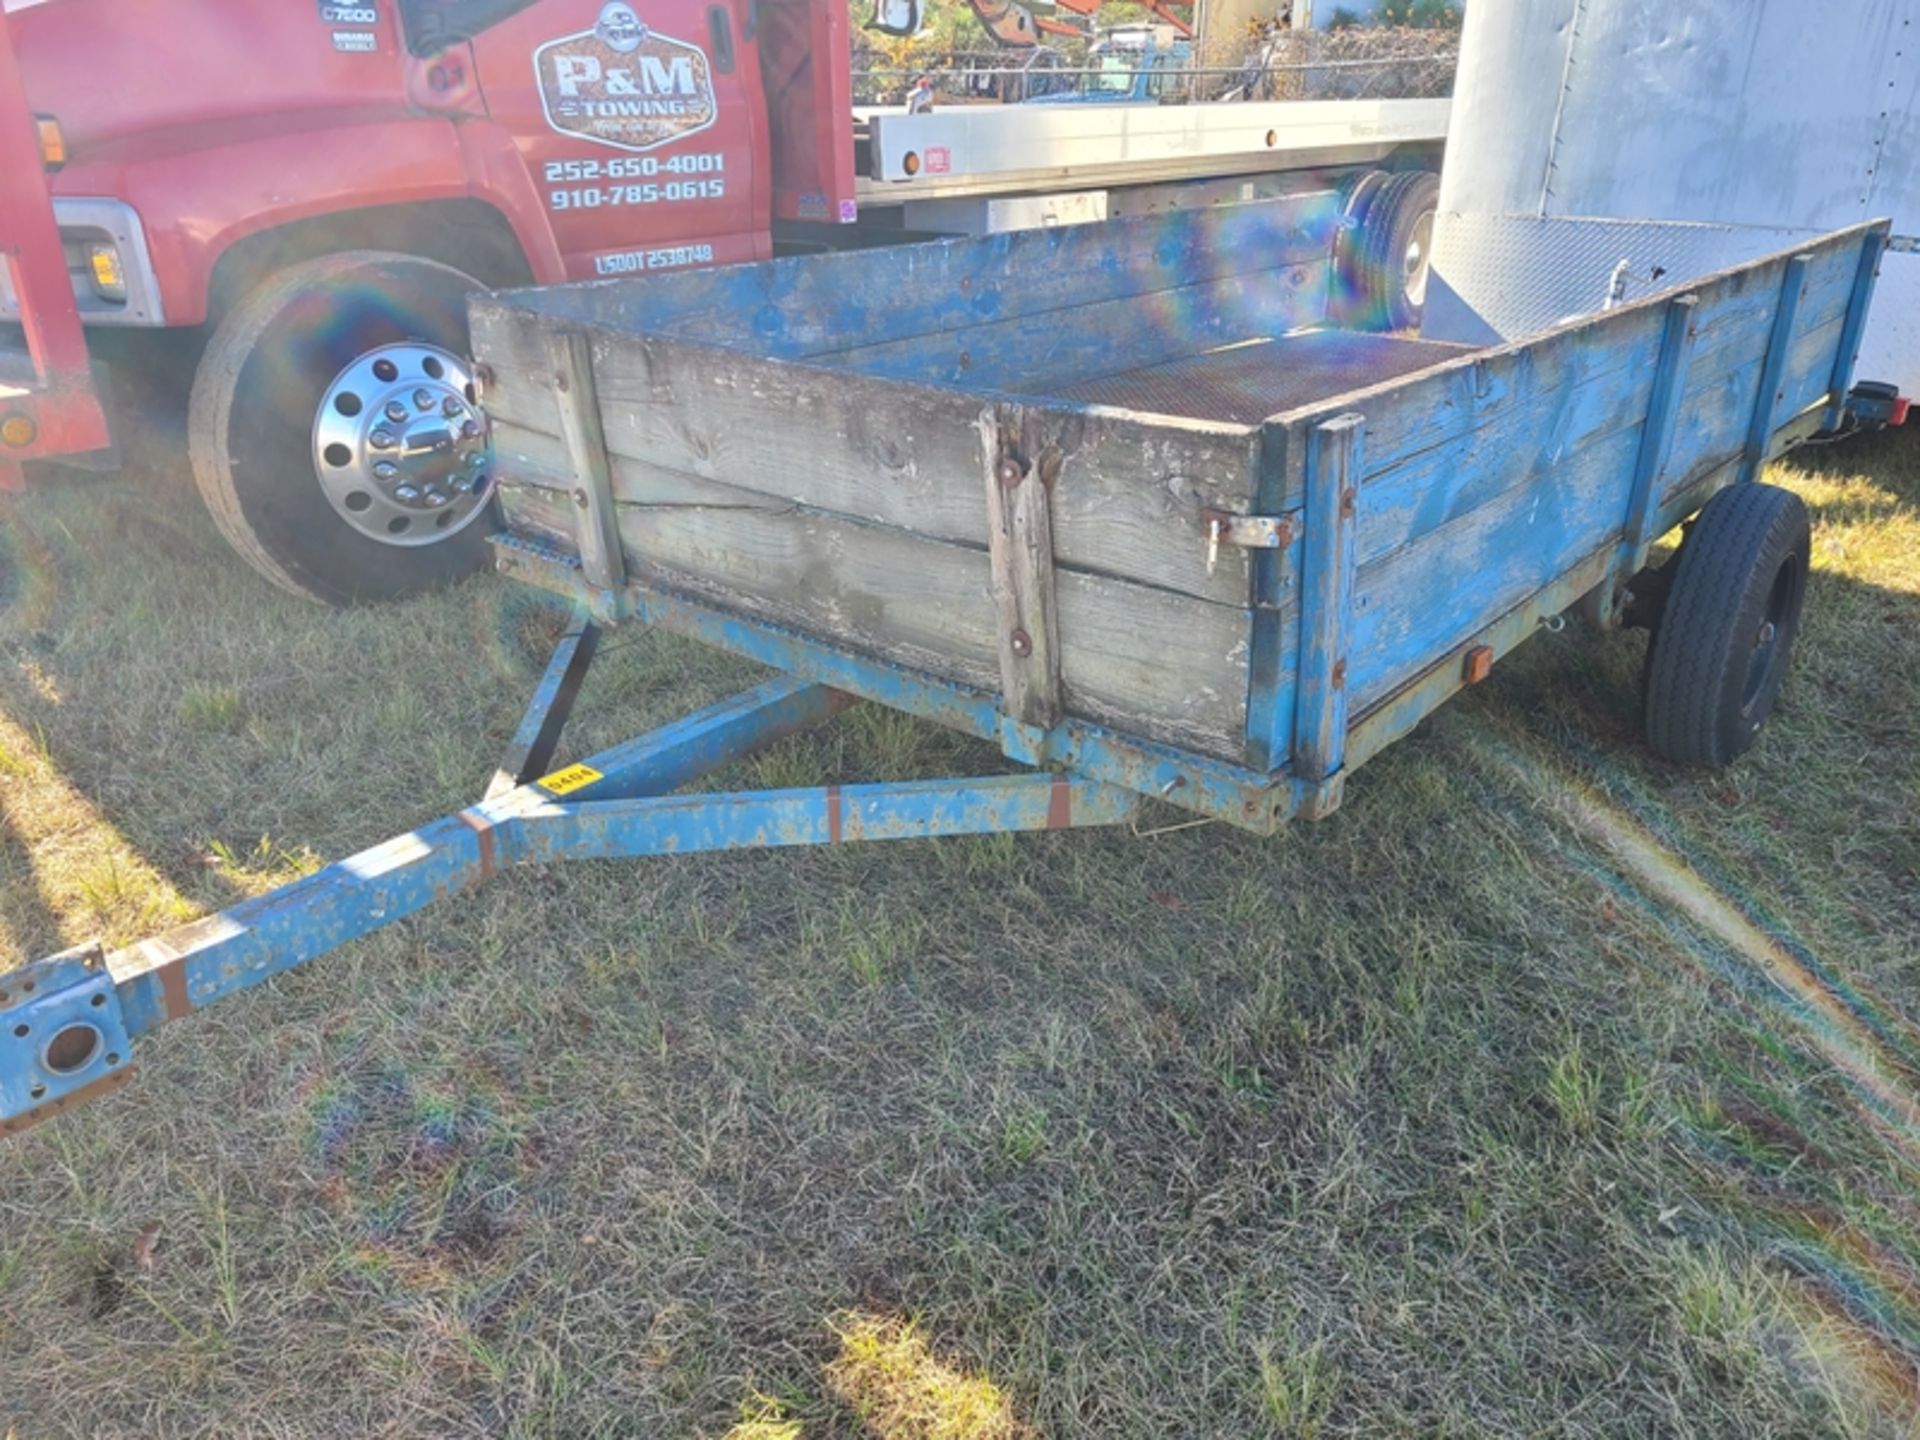 6' X 12' steel trailer with sides and ramps